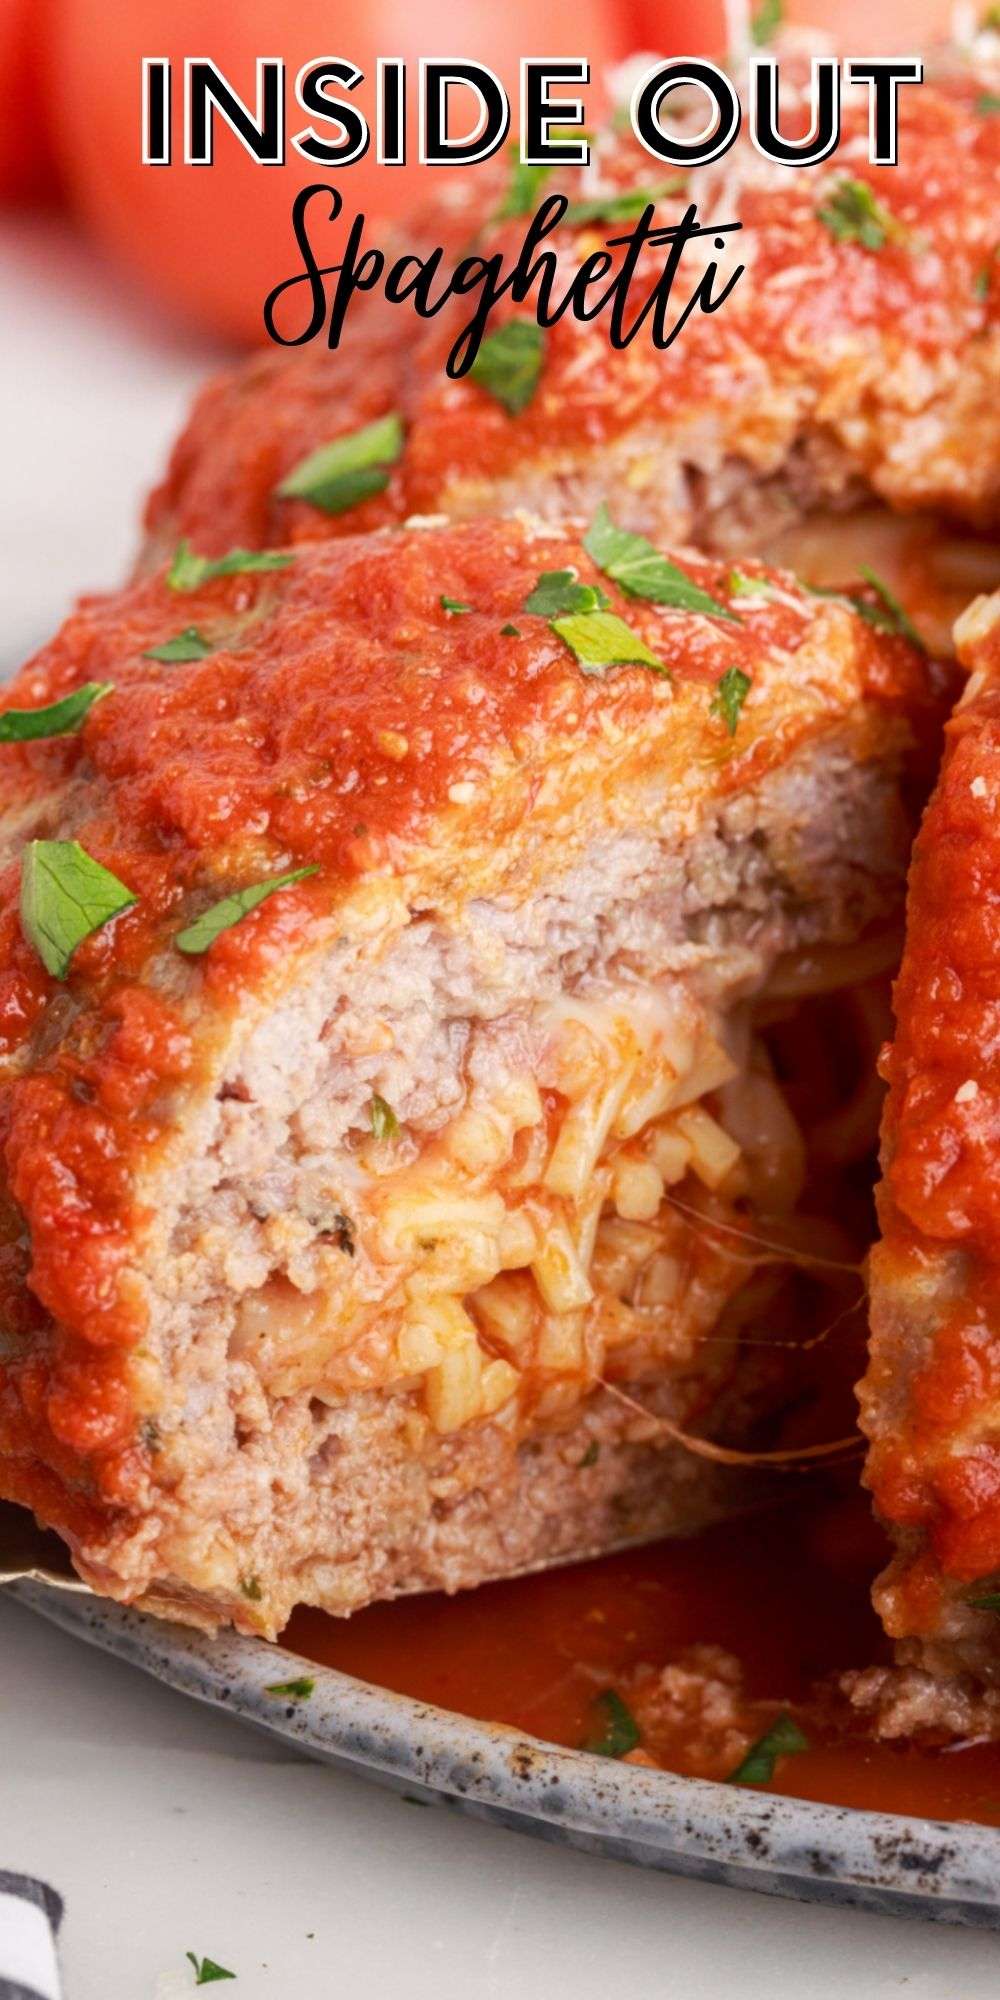 What’s better than spaghetti and meatballs? Spaghetti in a meatball! The whole family will love this Inside Out Spaghetti recipe! via @familyfresh